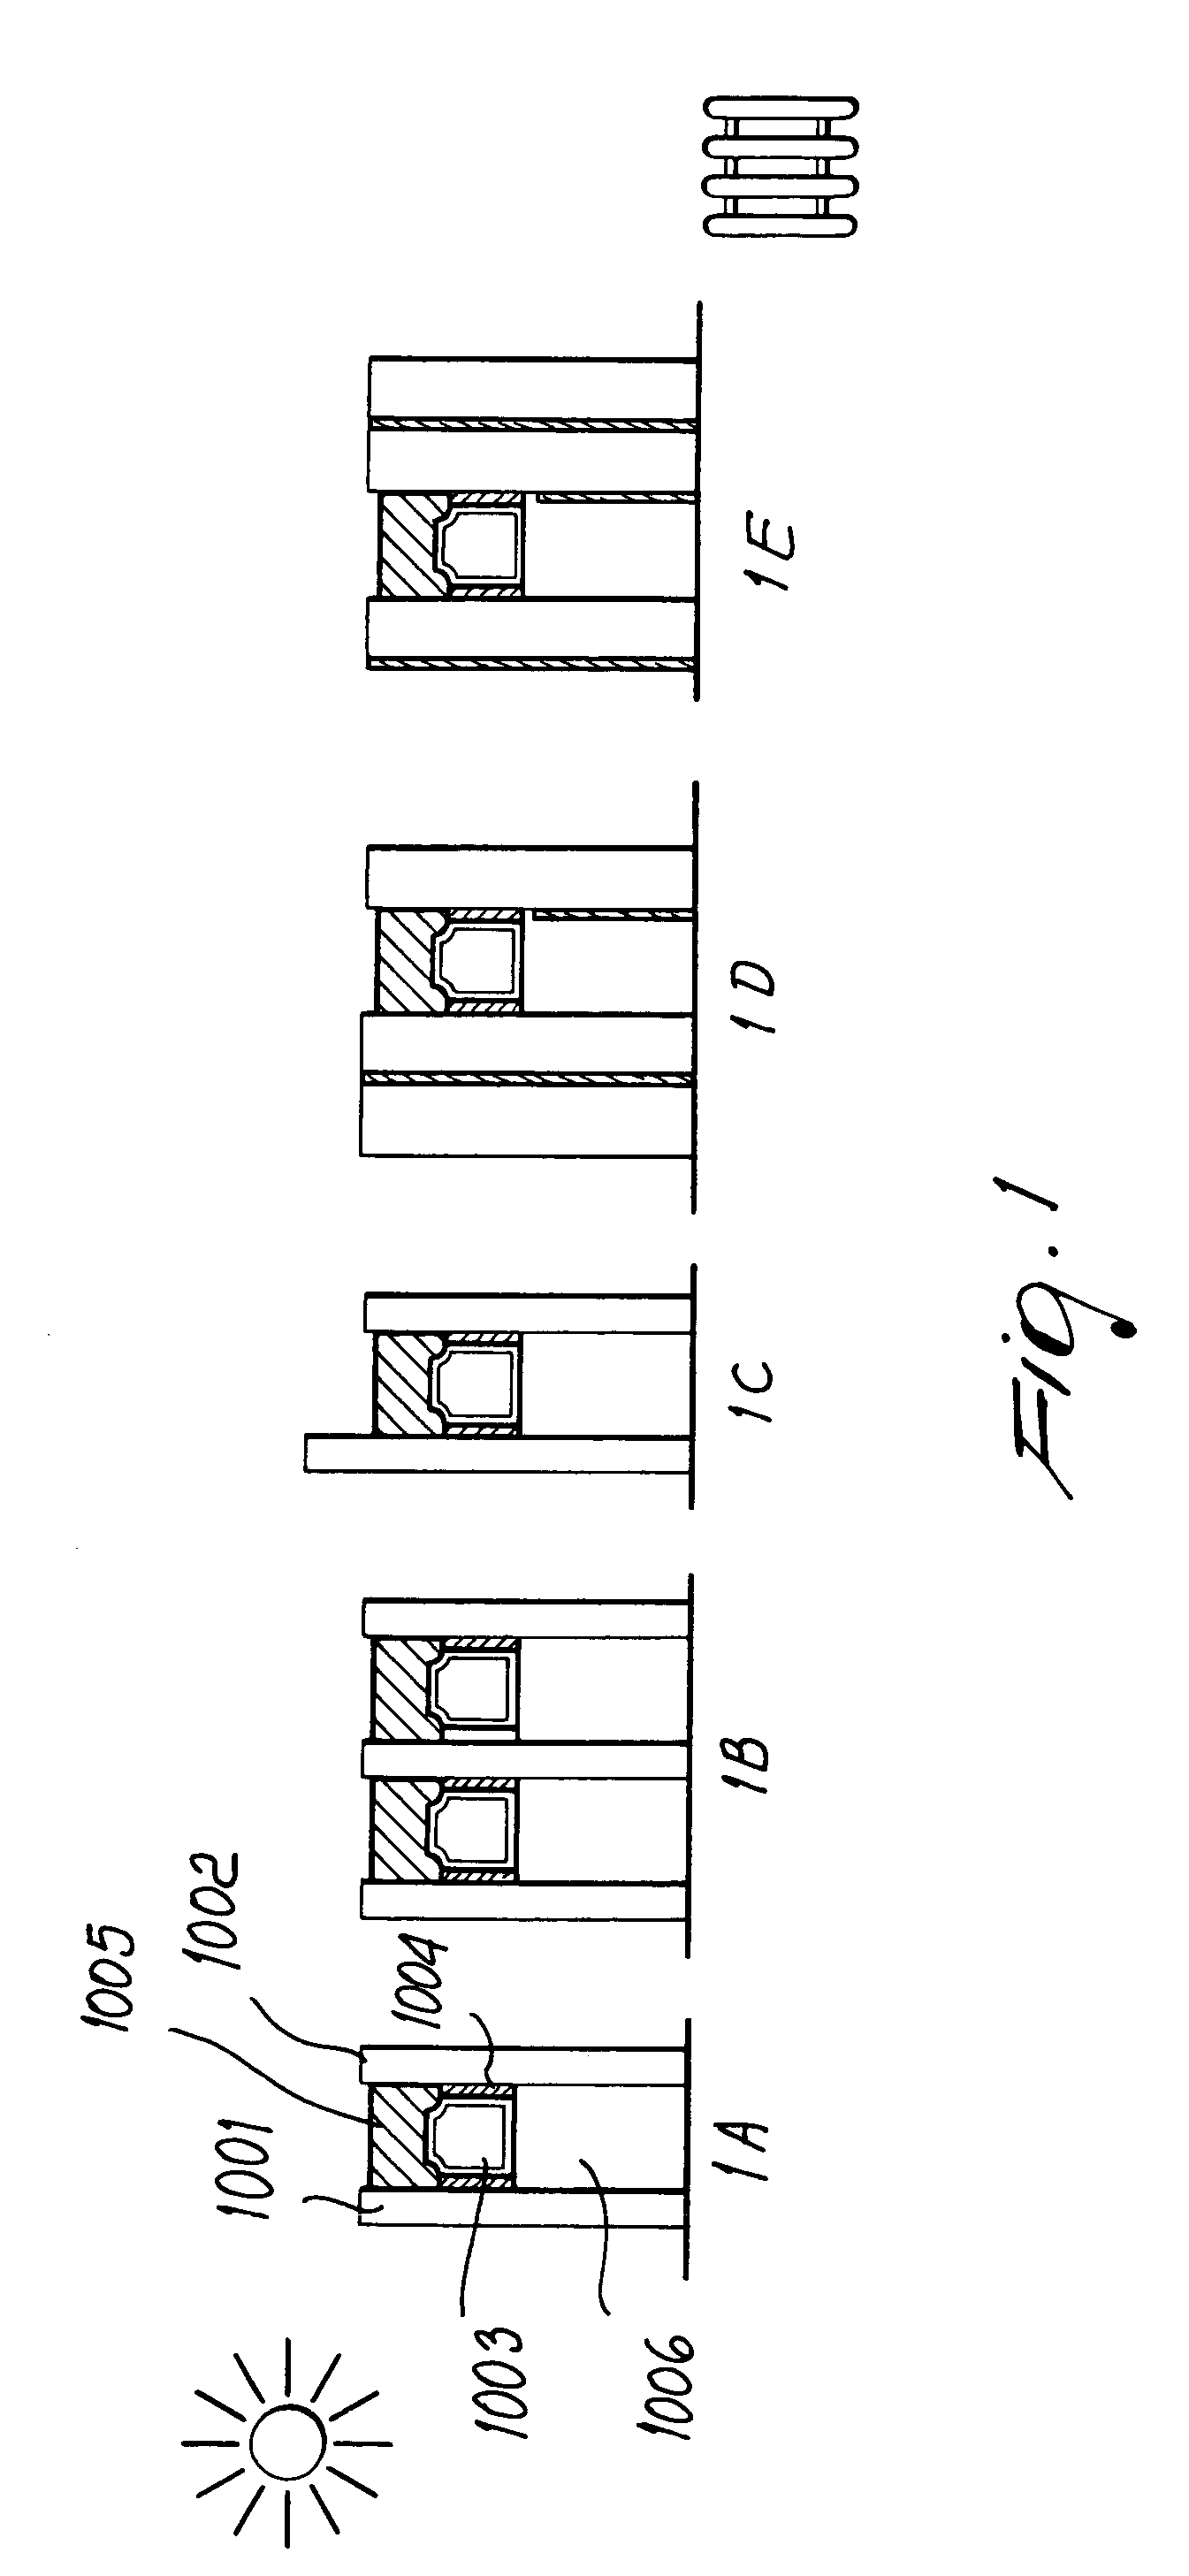 Automatic machine for grinding the borders of glass panes